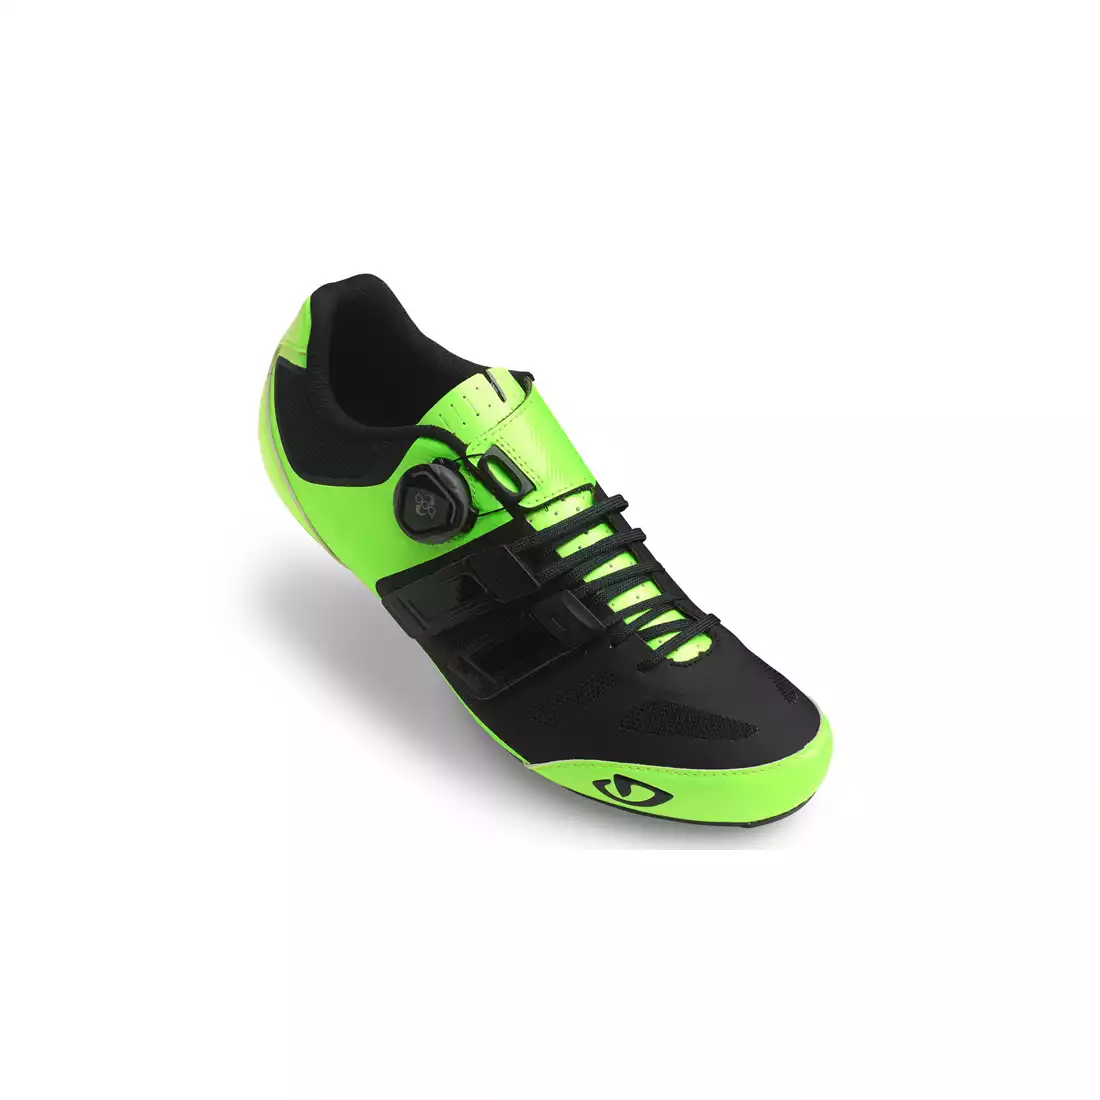 Giro Mens Sentrie Techlace Road Cycling Shoes